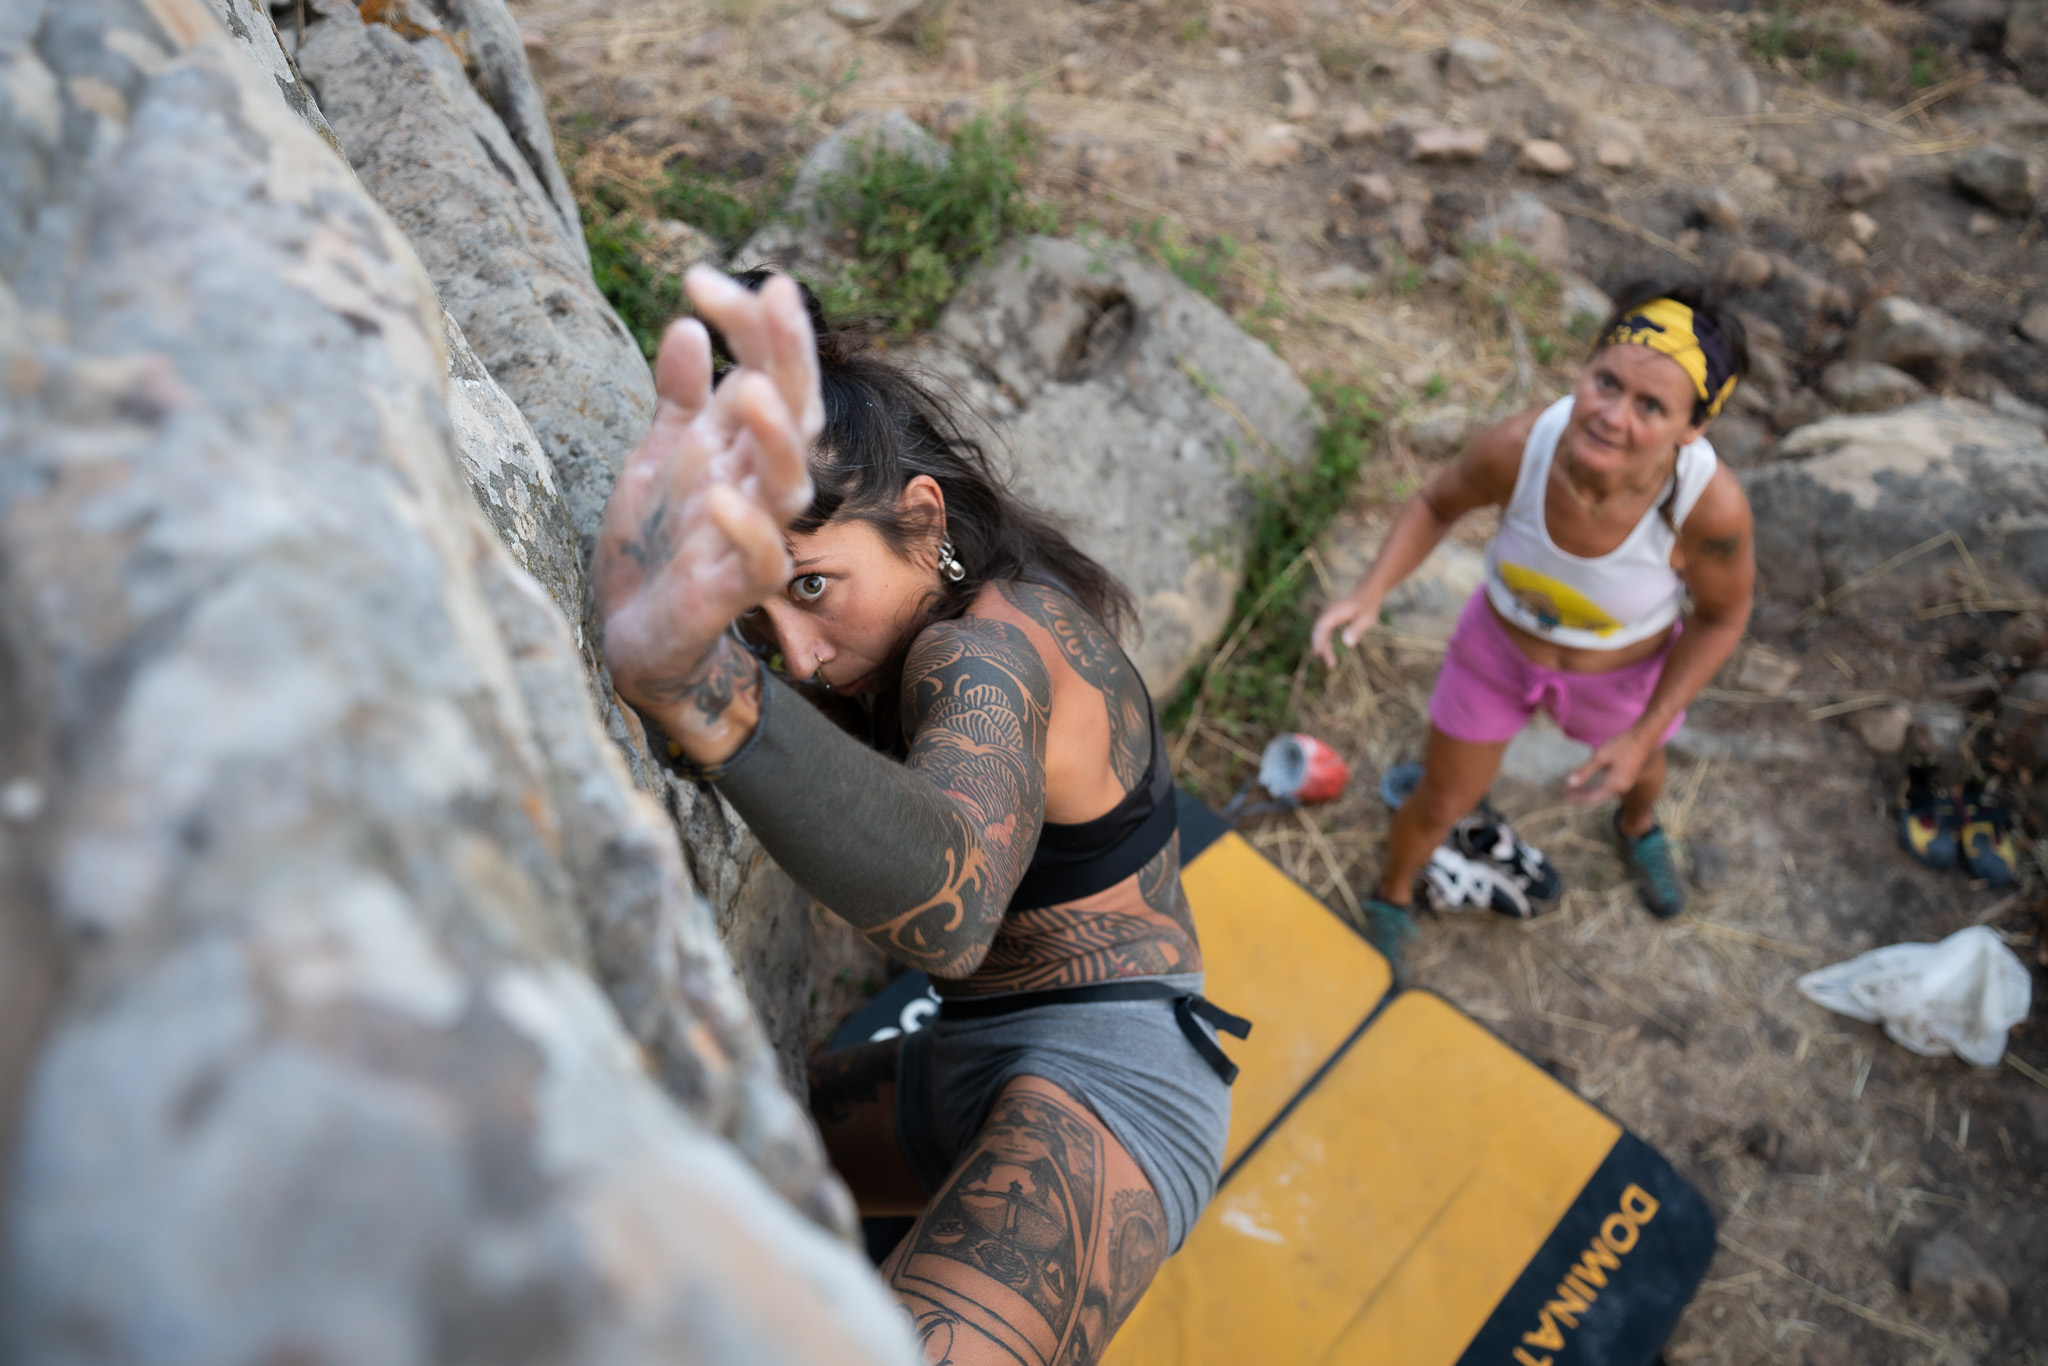 A person bouldering with a spotter